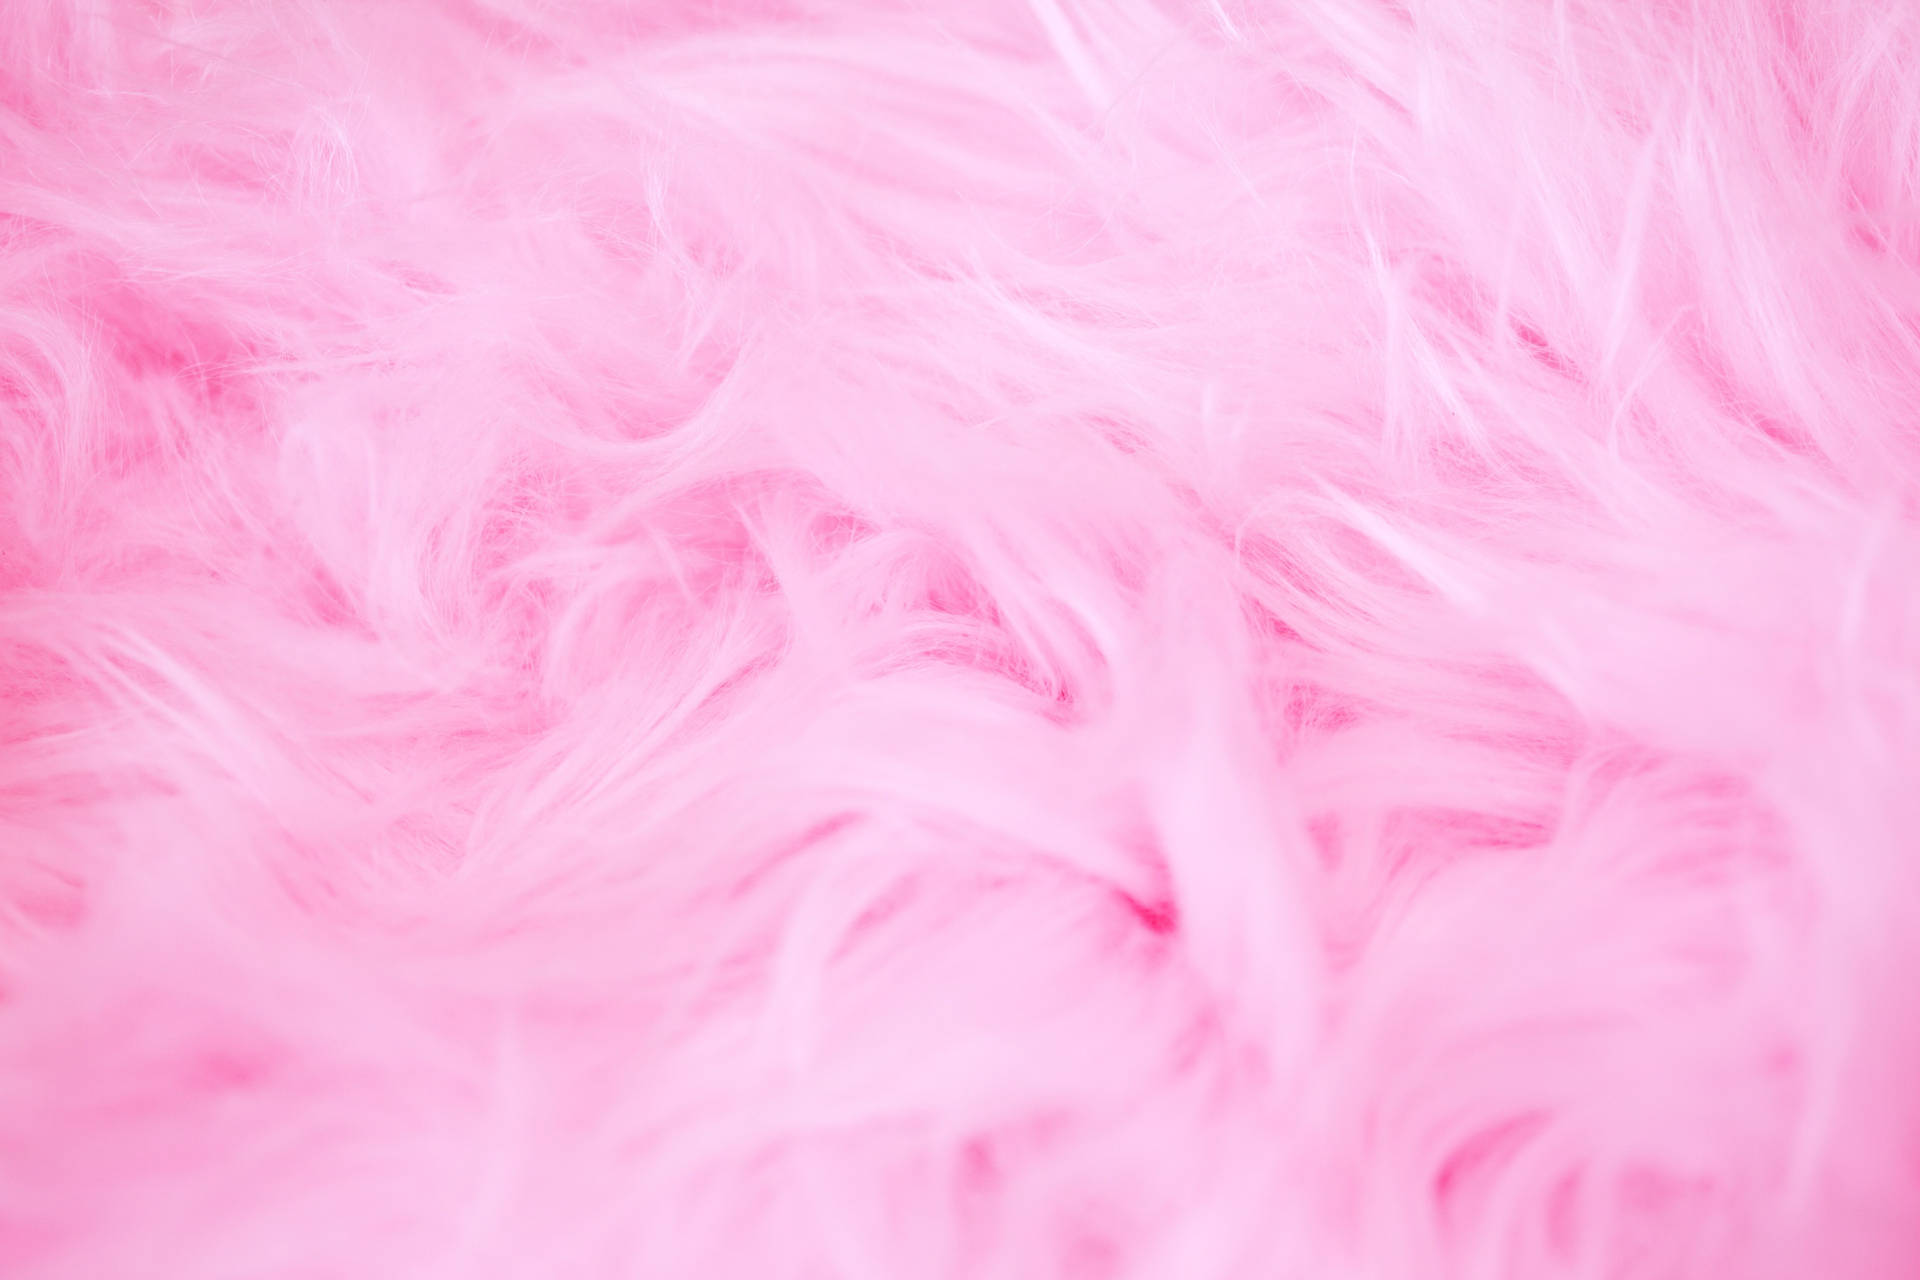 Fluffy Pink Aesthetic Girly Texture